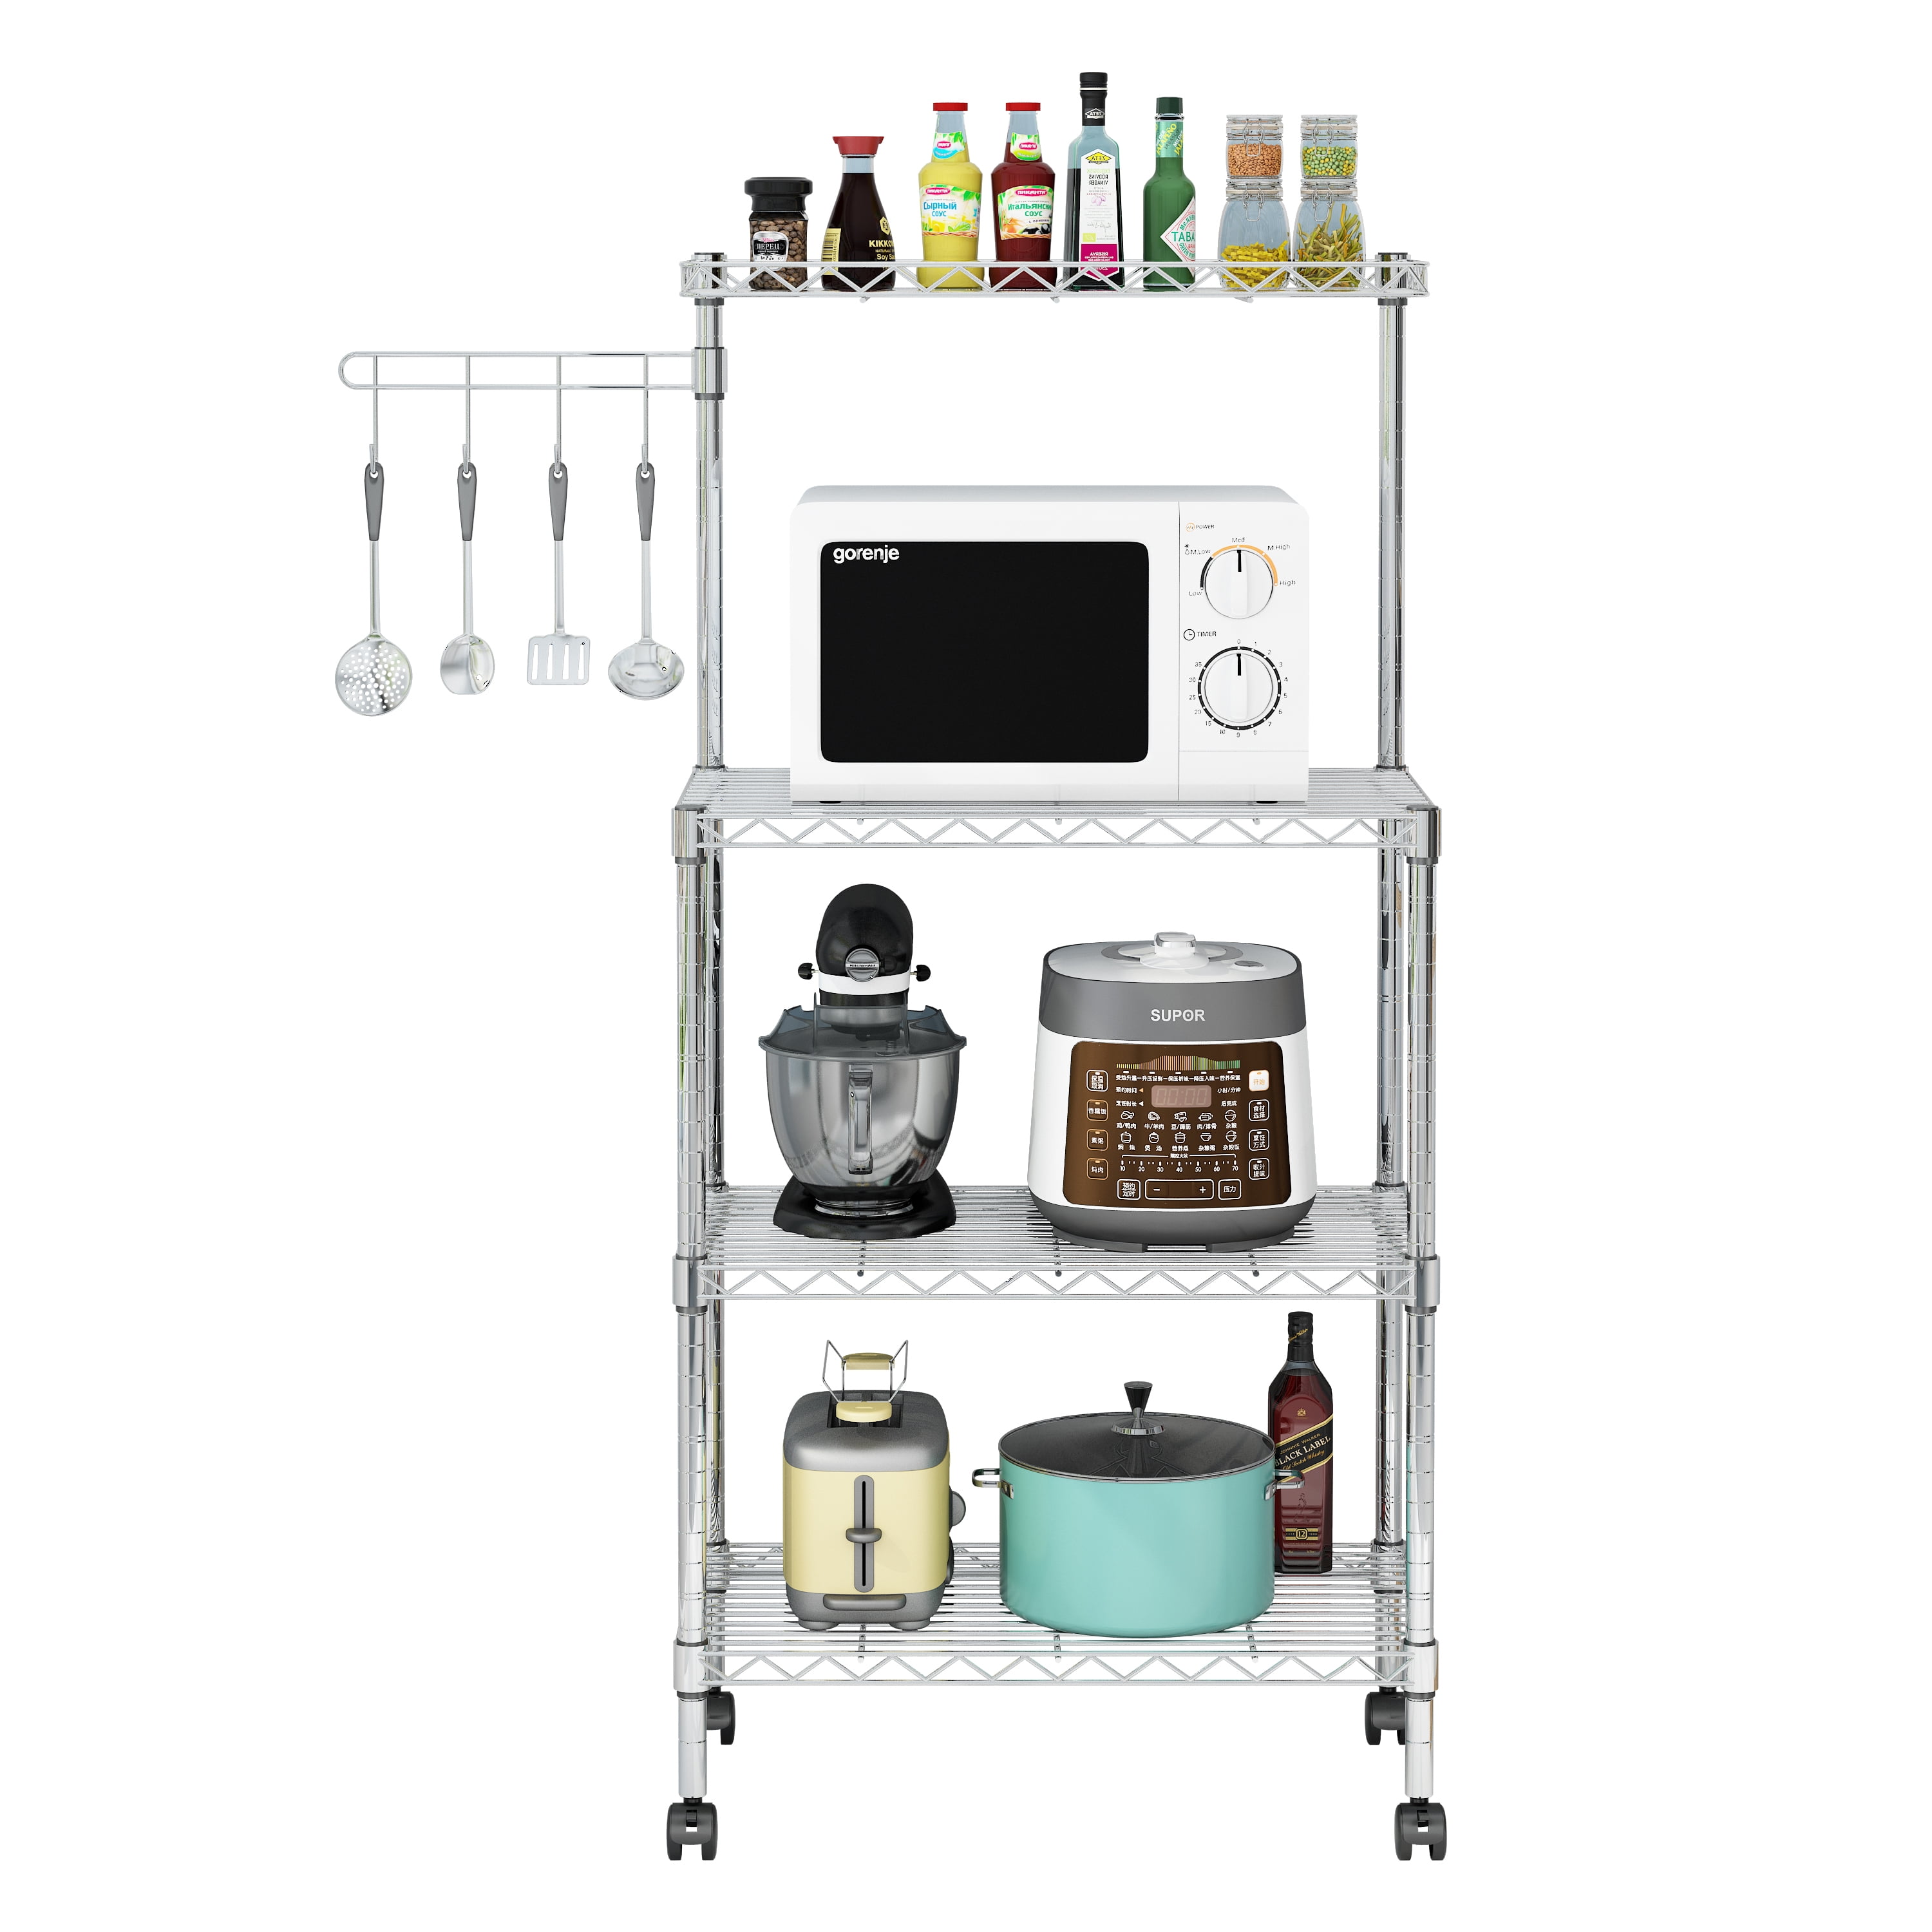 Dropship Kitchen Bakers Rack, Heavy Duty Bakers Rack 4-Tier Free Standing  Kitchen Storage Shelf Rack Hight Adjustable With Wheels & Feet, Industrial  Metal Microwave Oven Stand (Black) to Sell Online at a